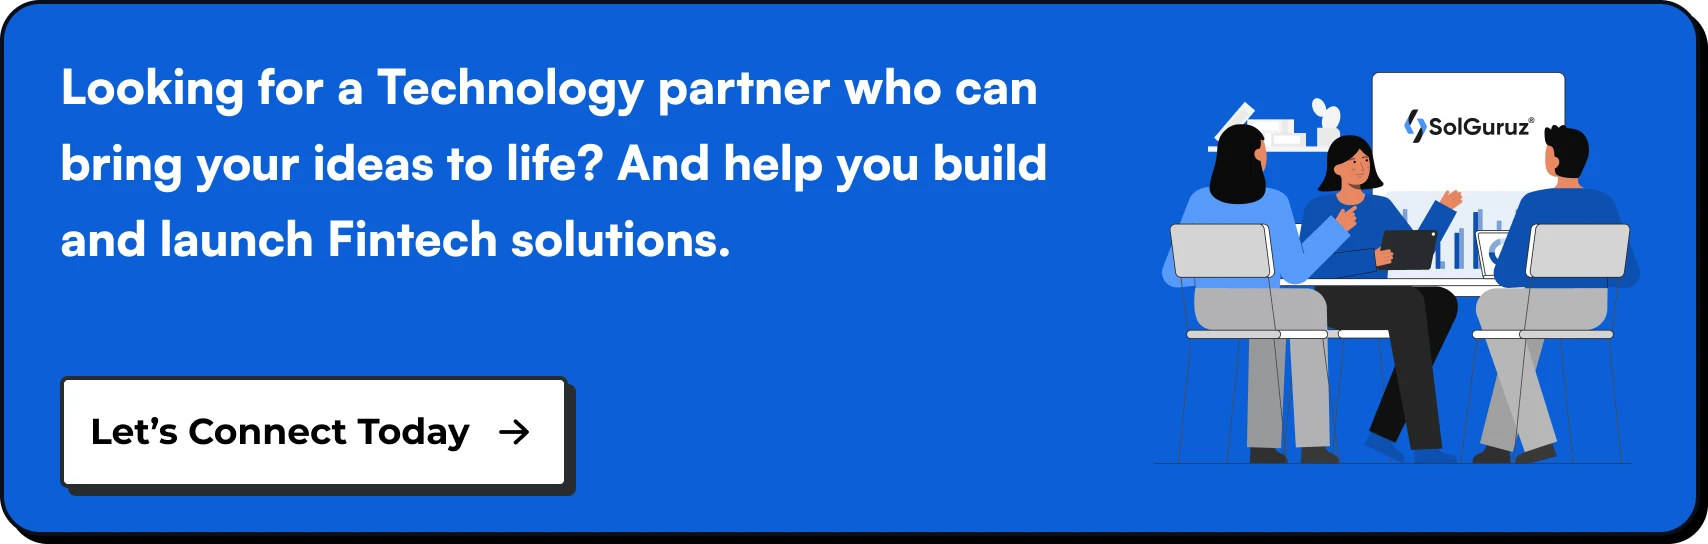 Looking for a Technology partner for building and launching Fintech solutions